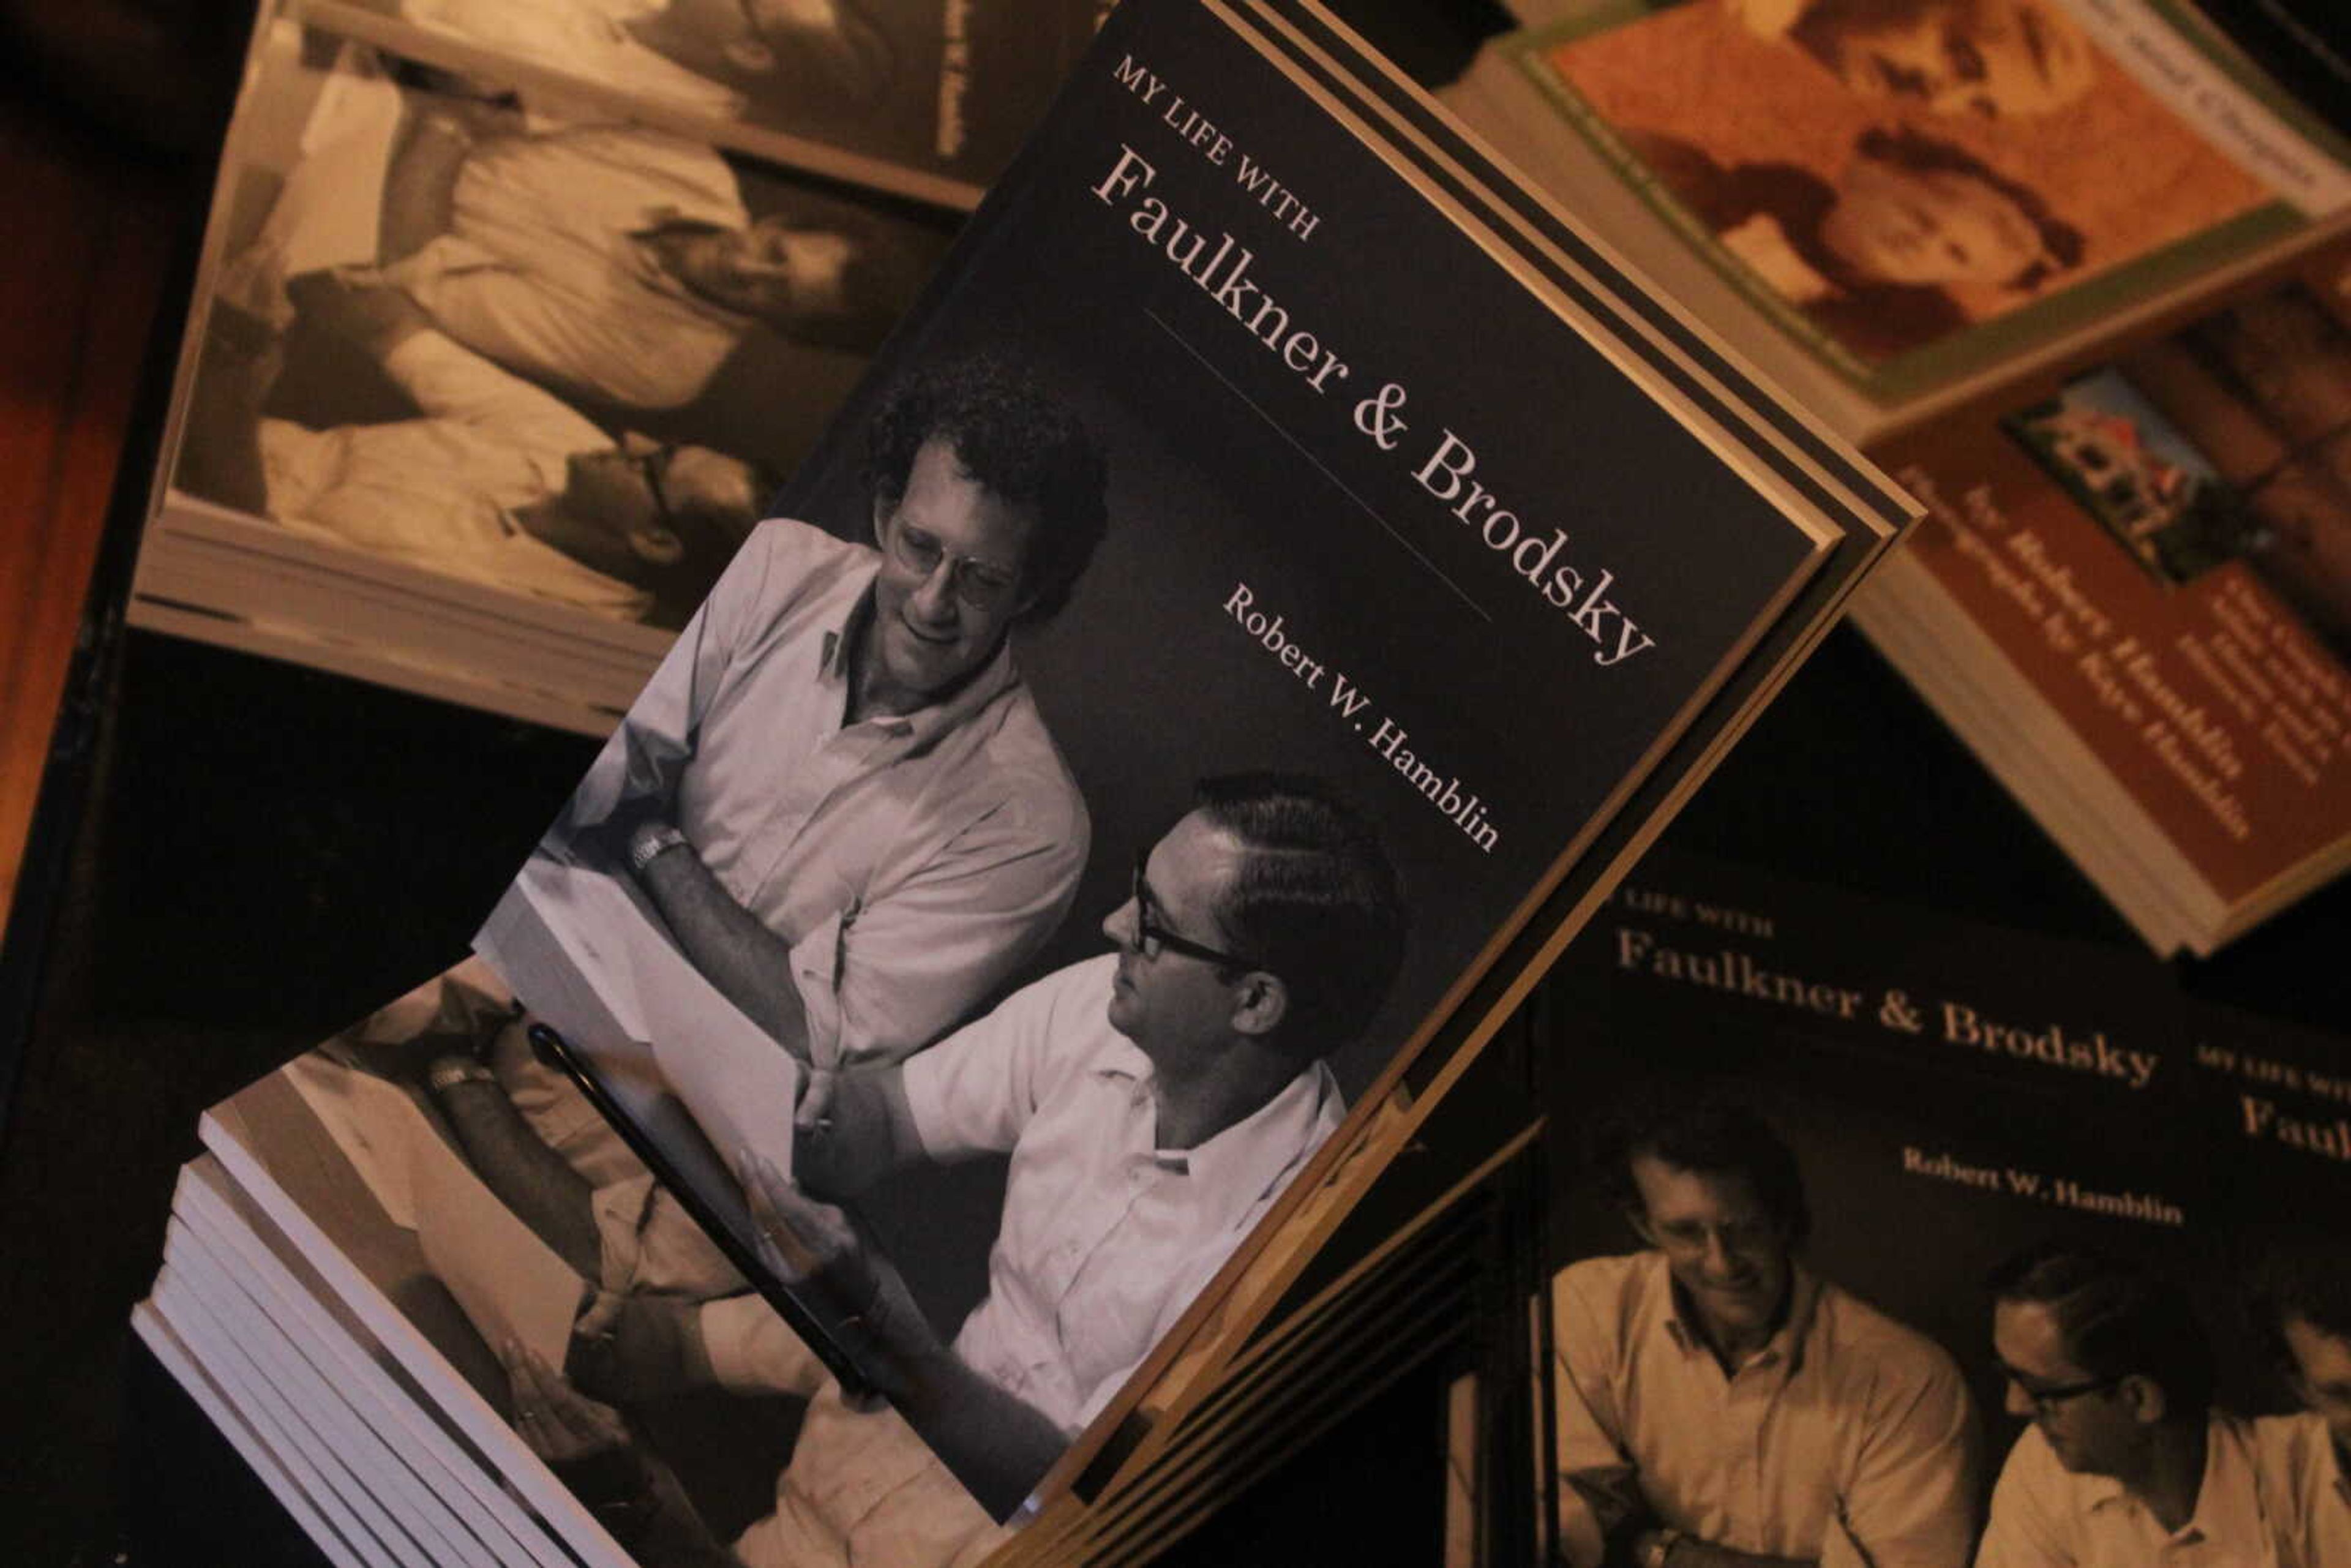 “My Life with Faulkner and Brodsky” book on display at at the book launch reception on Nov. 8.